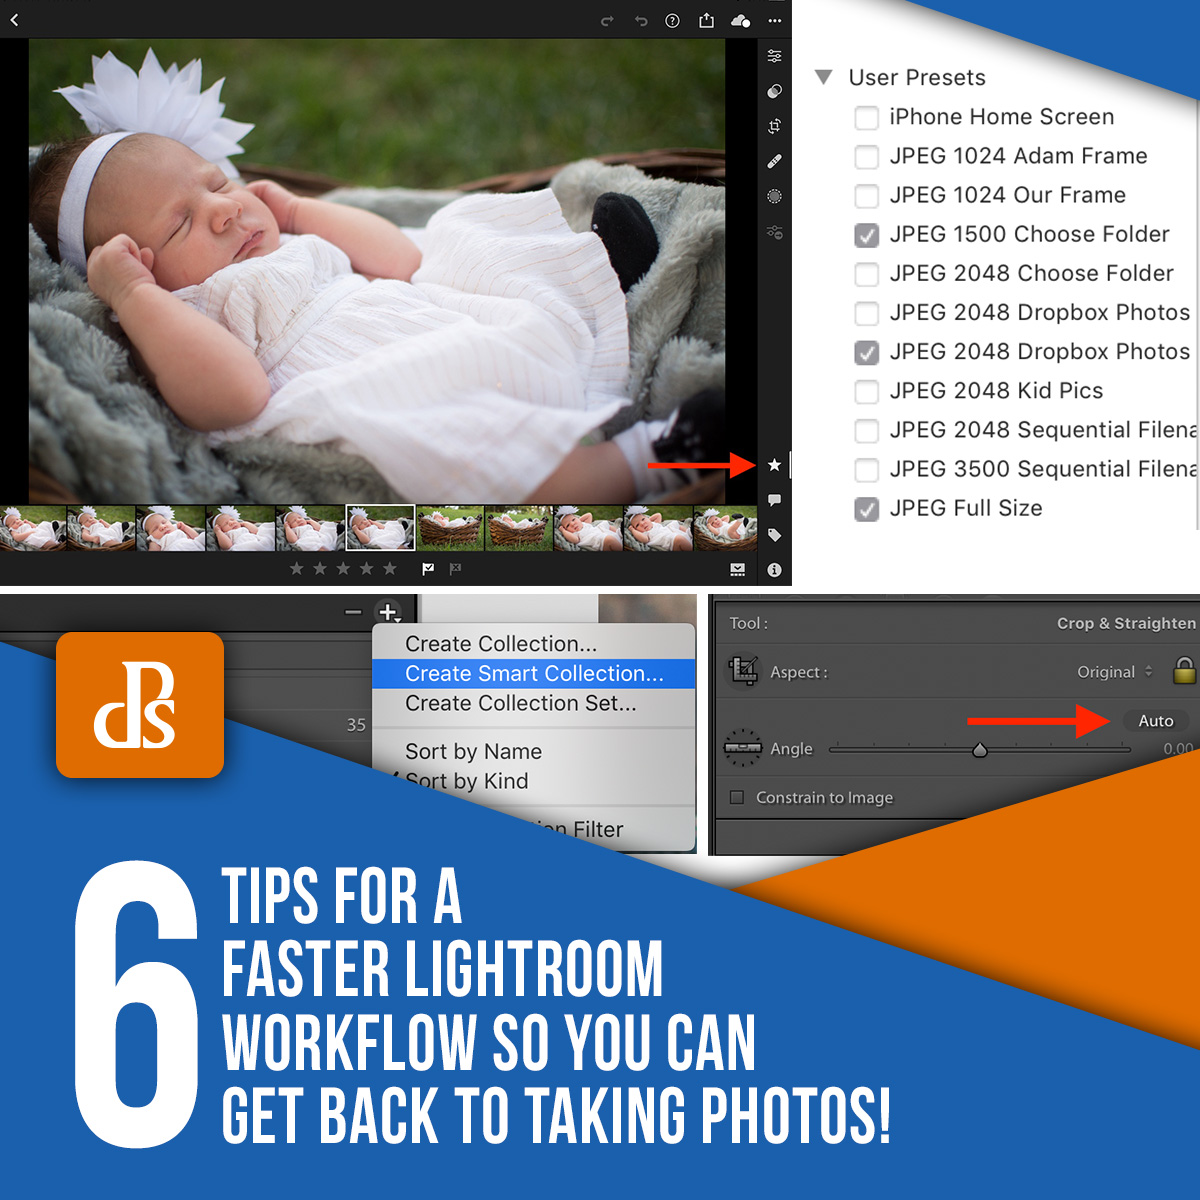 6 tips for a faster Lightroom workflow so you can get back to taking photos